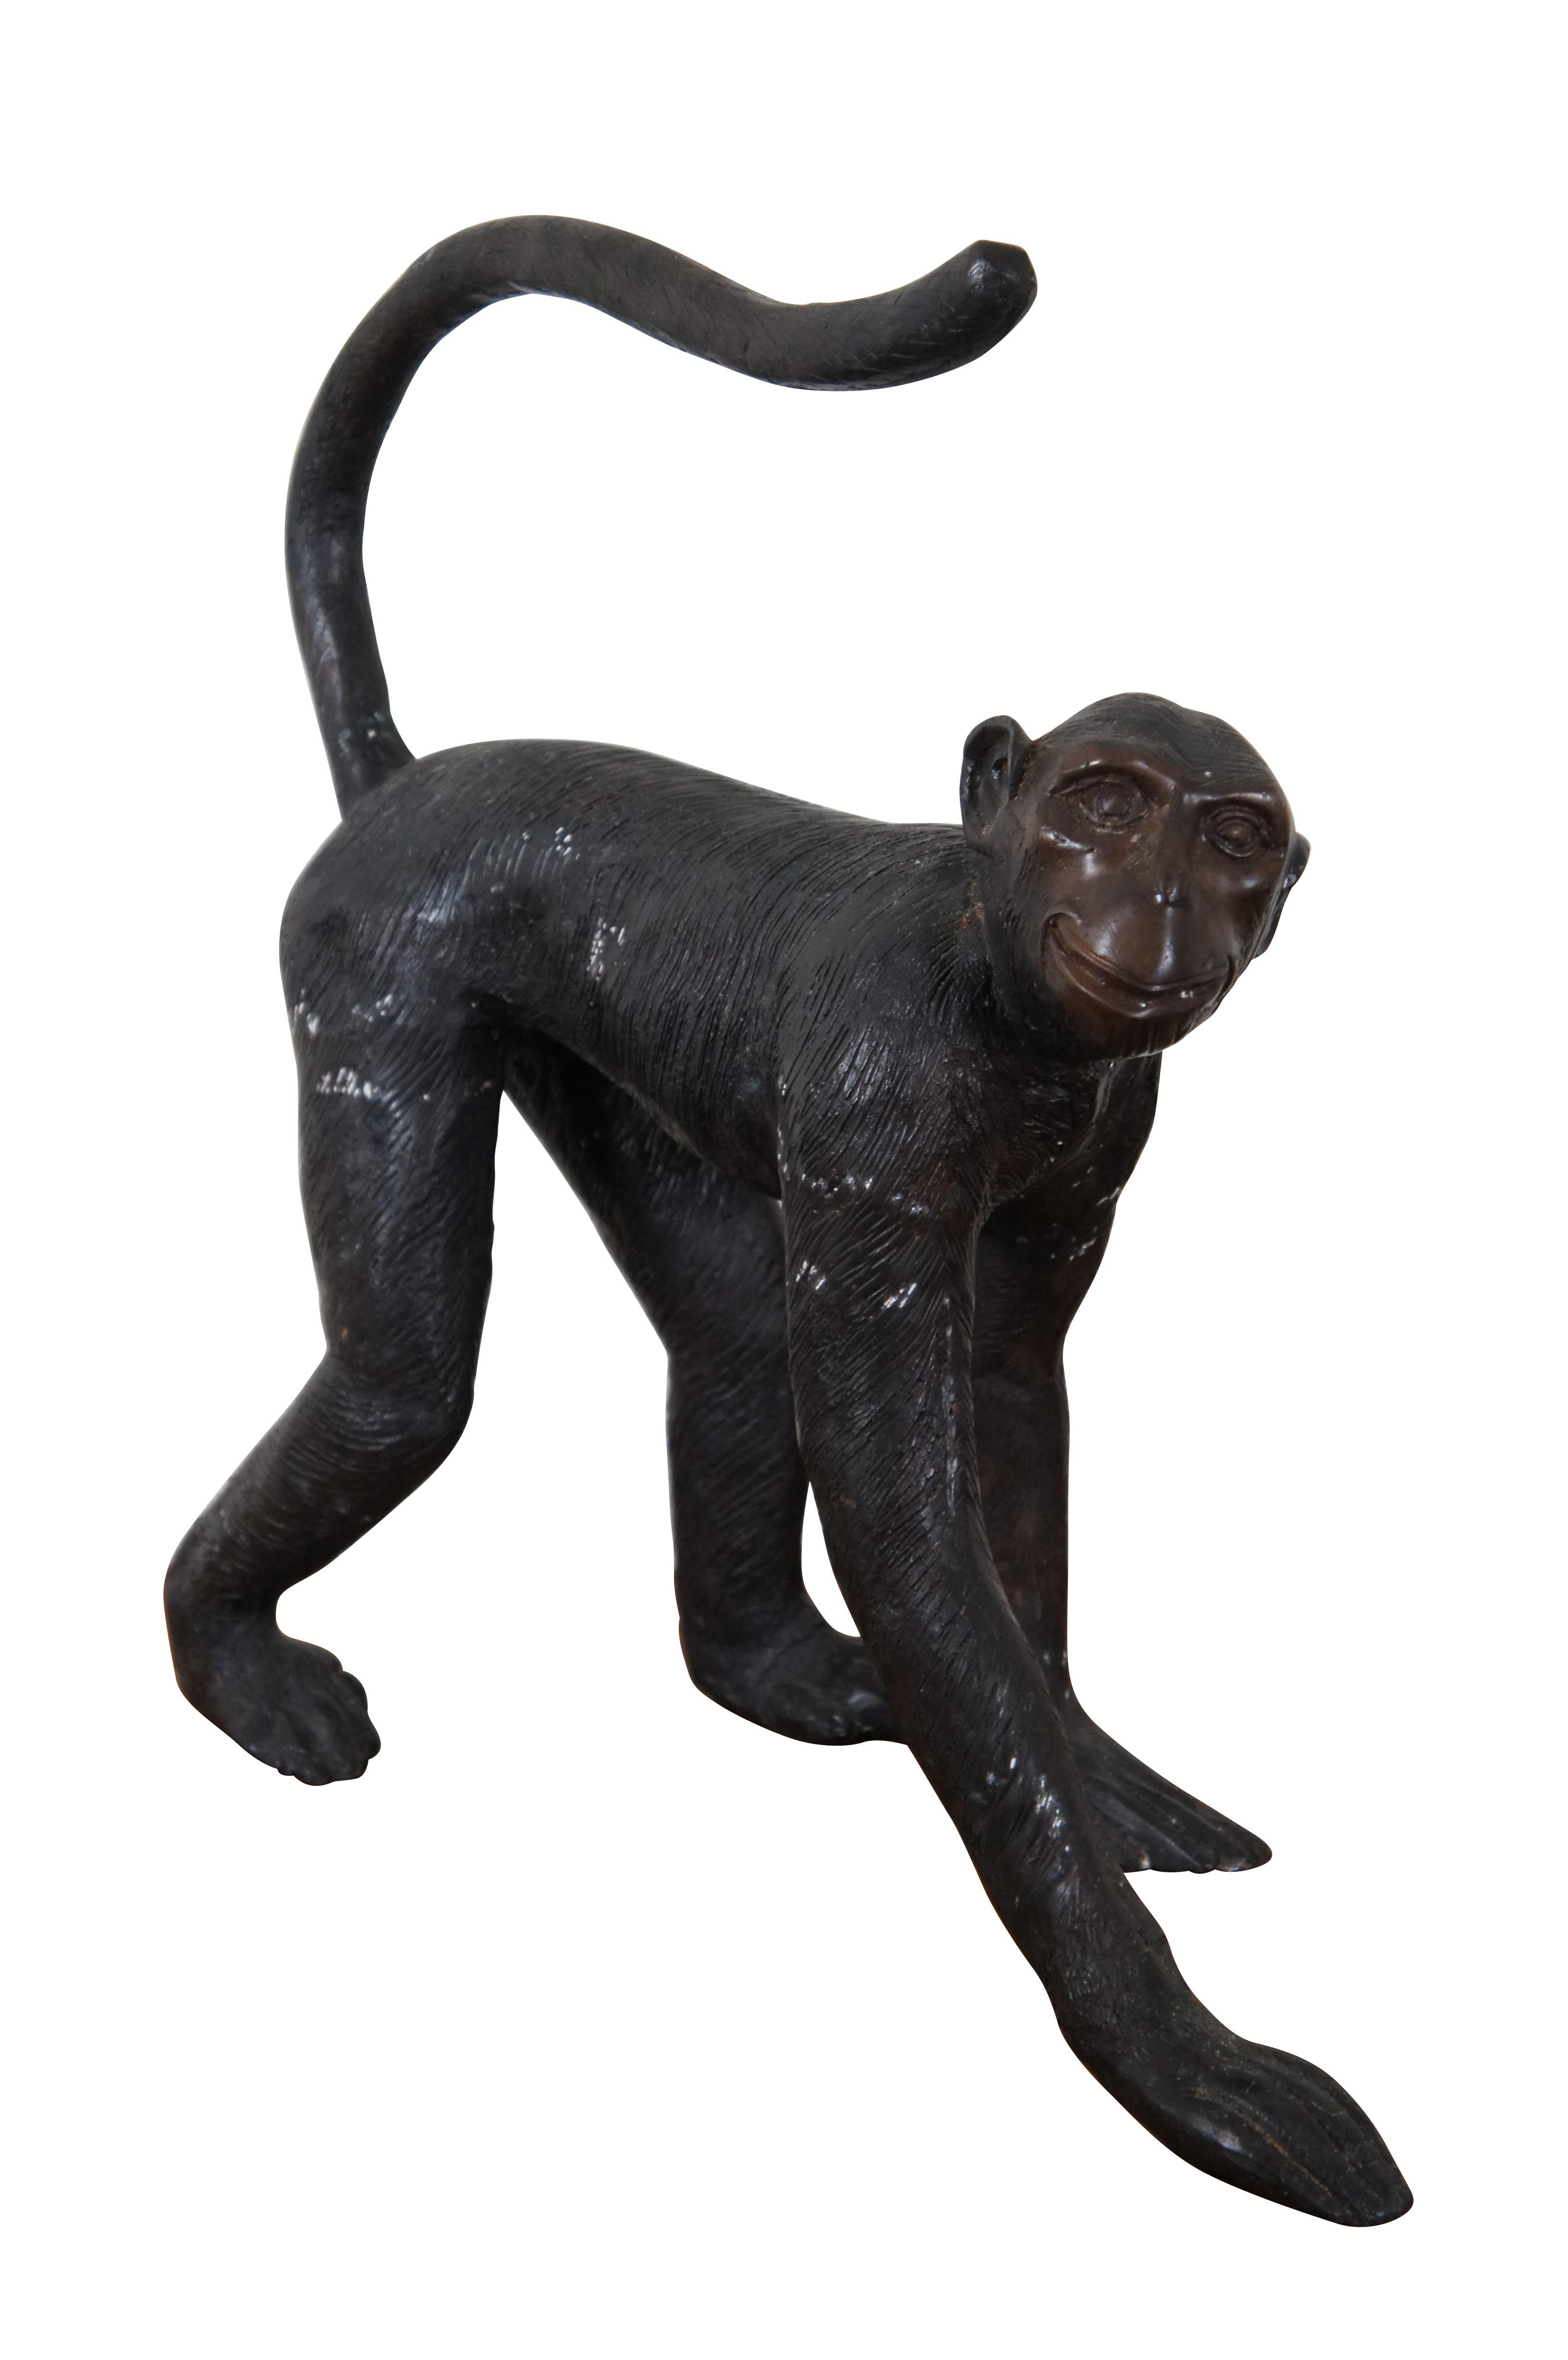 Large vintage Maitland Smith bronze sculpture or statue of a happy monkey walking on all fours with his tail raised over his back.  Used as a toilet paper holder.

Dimensions:
20.5” x 8” x 20.25” (Width x Depth x Height)